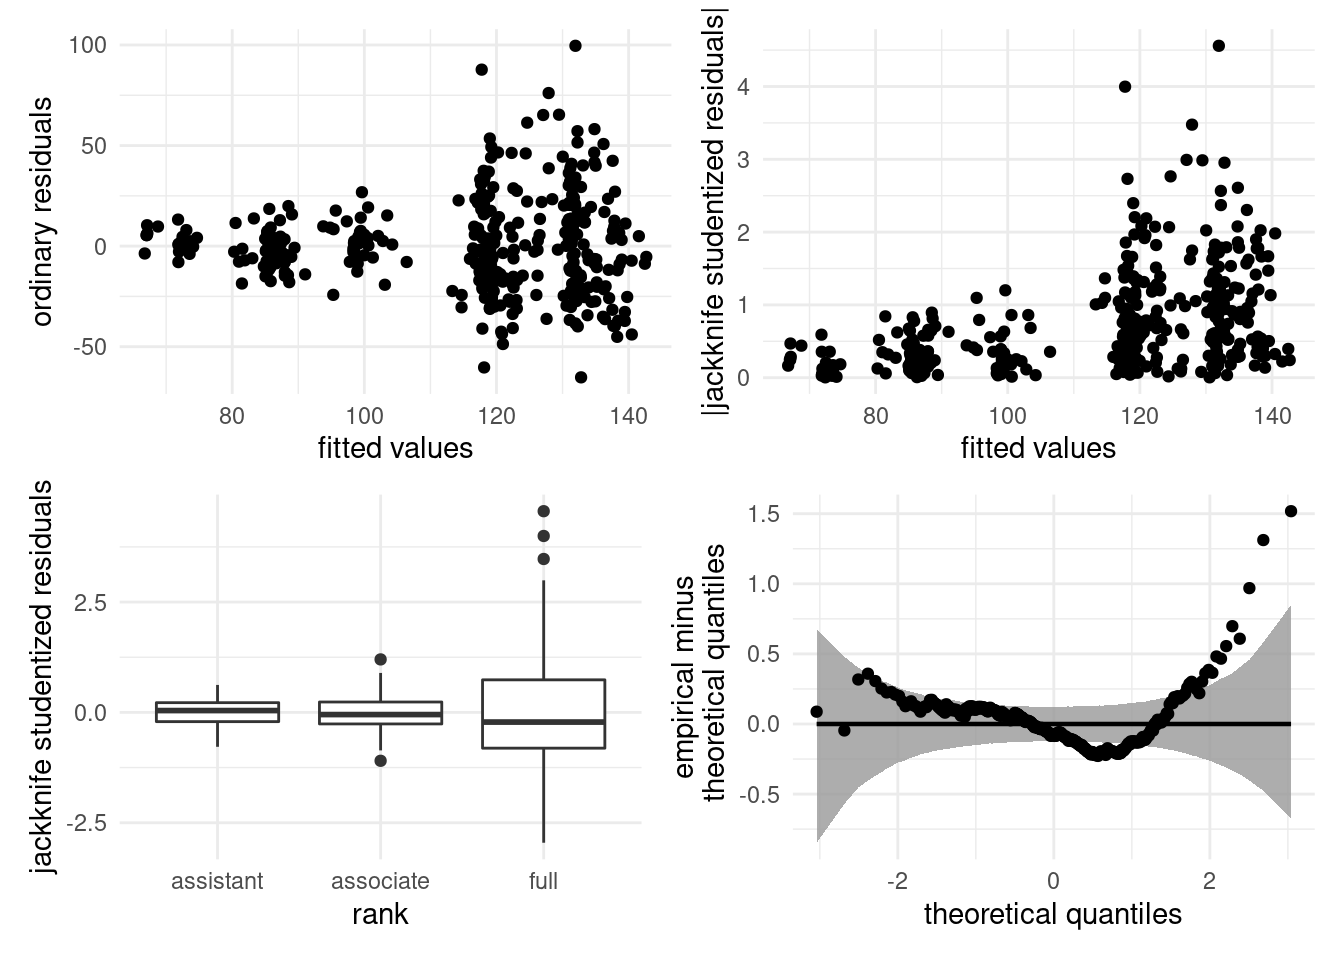 Diagnostic plots for the college data example: ordinary residuals against fitted values (top left), absolute value of the jacknnife studentized residuals against fitted values (top right), box and whiskers plot of jacknnife studentized residuals (bottom left) and detrended Student quantile-quantile plot (bottom right). There is clear group heteroscedasticity.